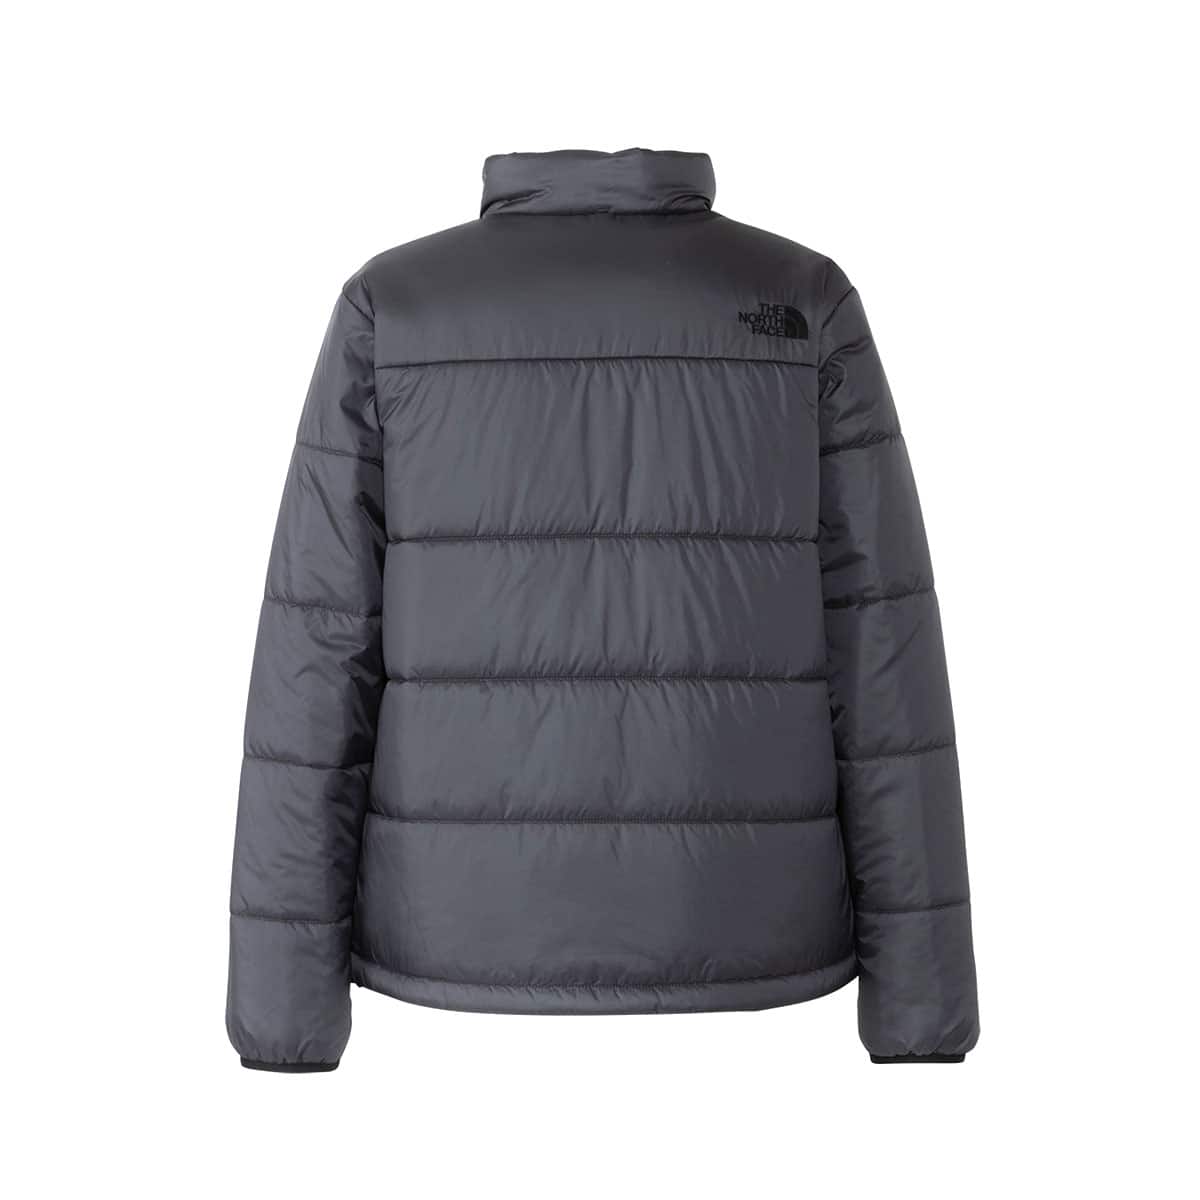 THE NORTH FACE CASSIUS TRICLIMATE JACKET ニュートープ2 23FW-I